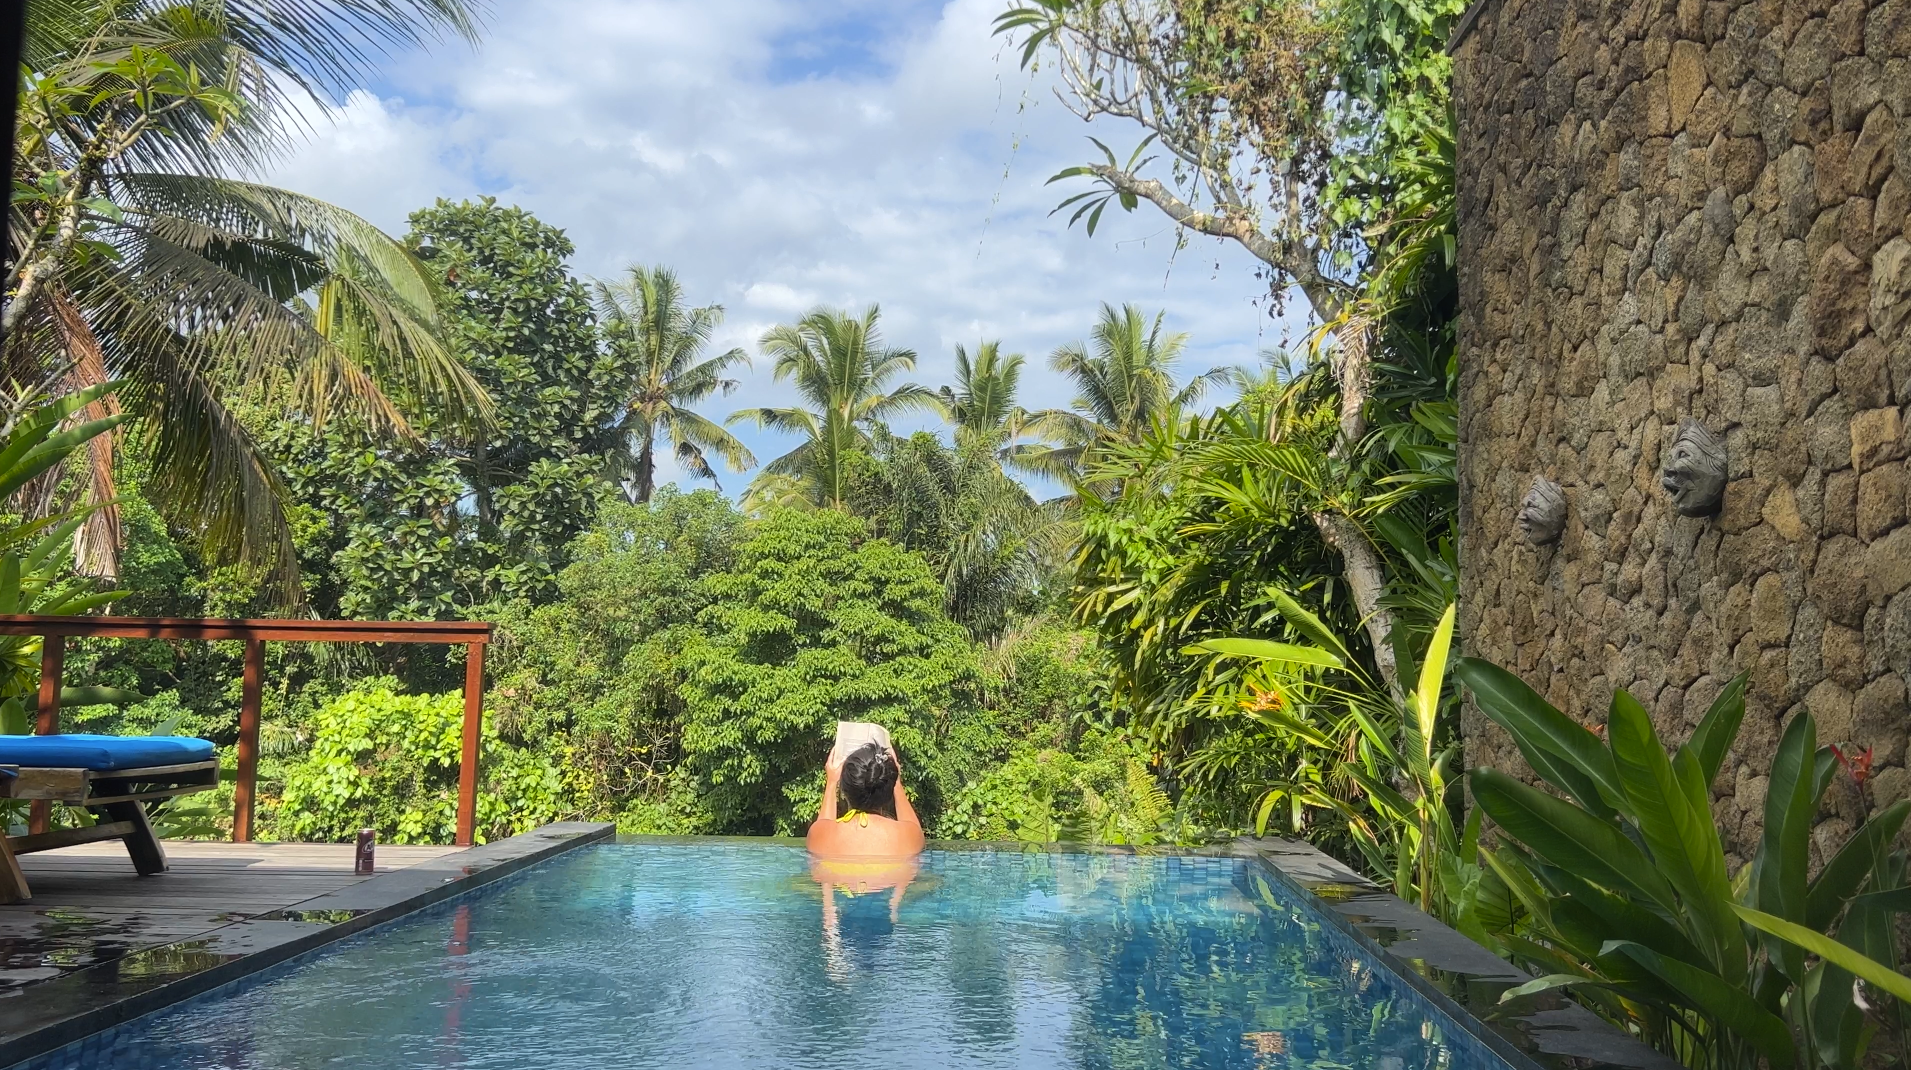 Relaxing in an Ubud, Bali villa pool with Bali's jungle forest in the background